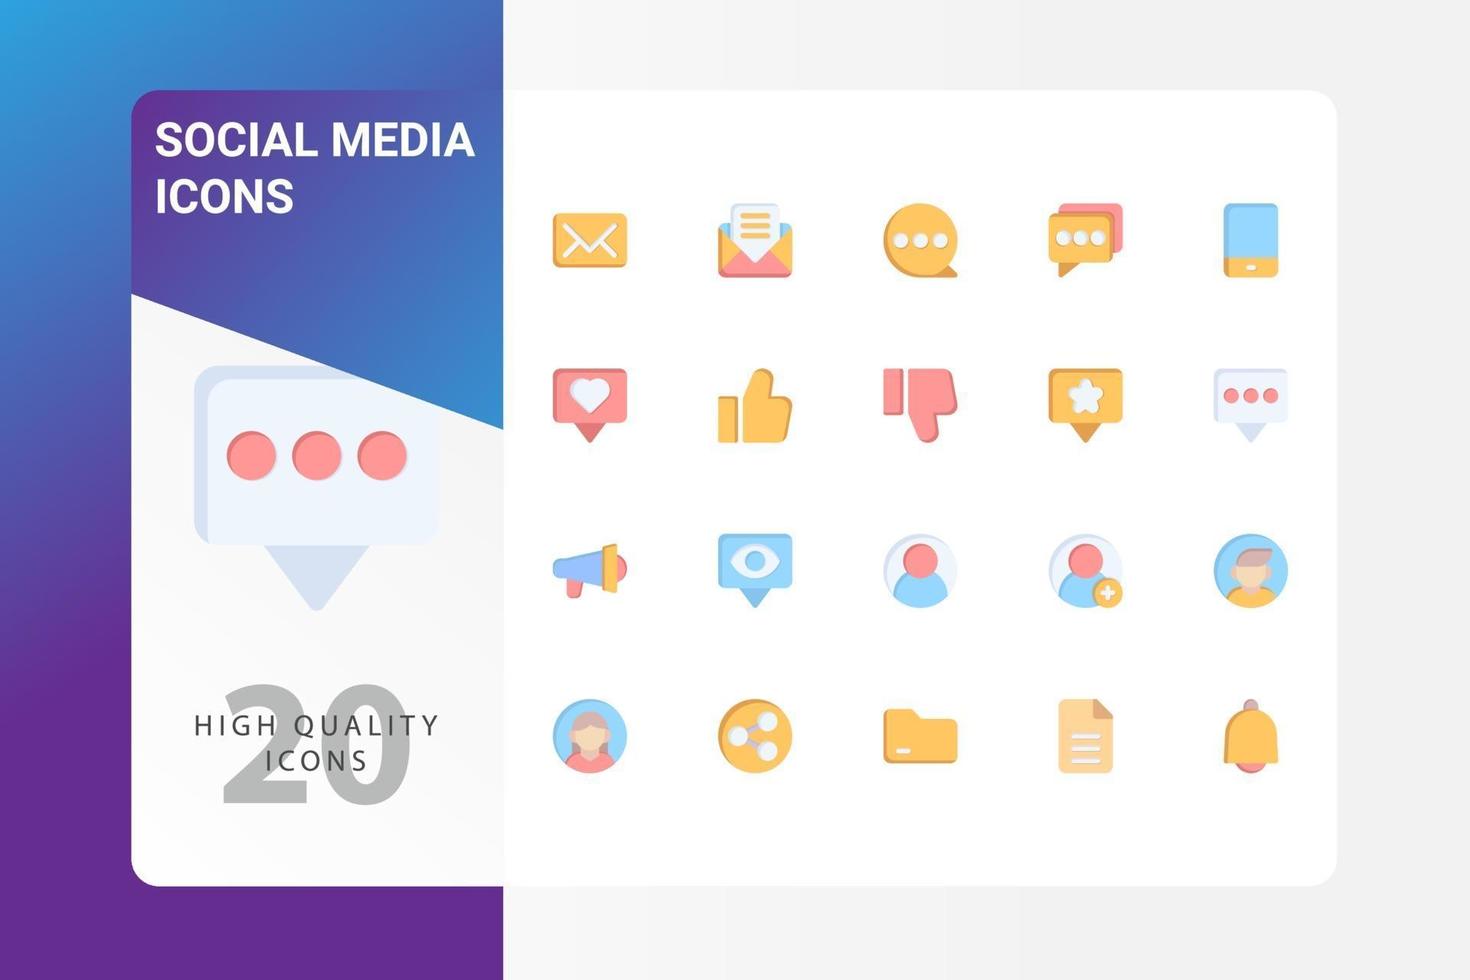 Social Media icon pack isolated on white background. for your web site design, logo, app, UI. Vector graphics illustration and editable stroke. EPS 10.